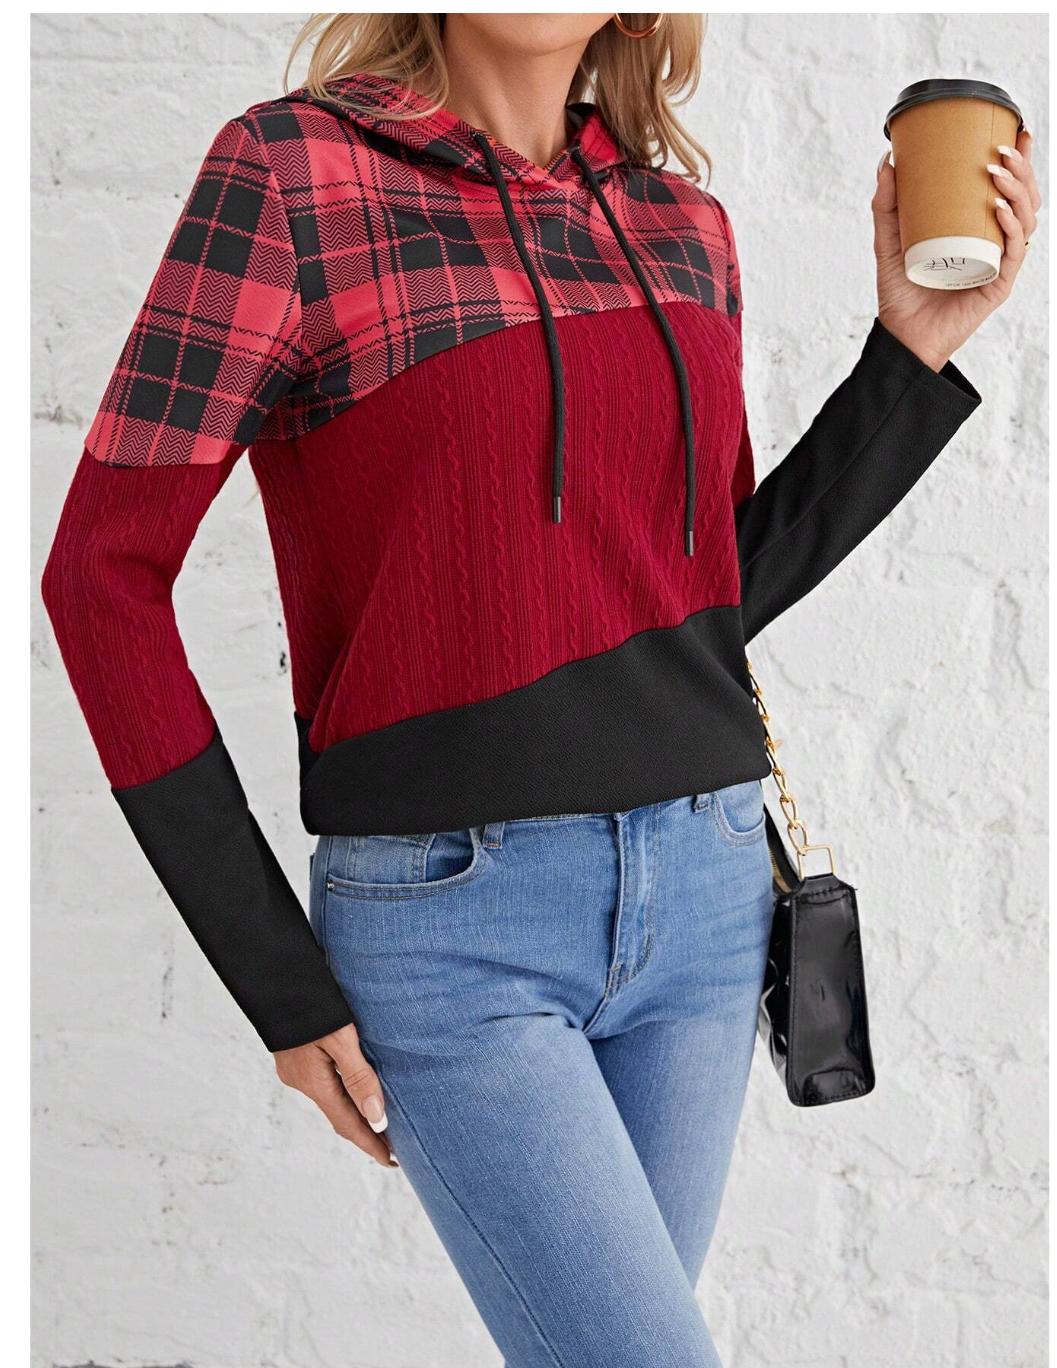 LUNE Chic Comfort: Plaid Perfection in Colorblock Harmony with Drawstring Elegance!